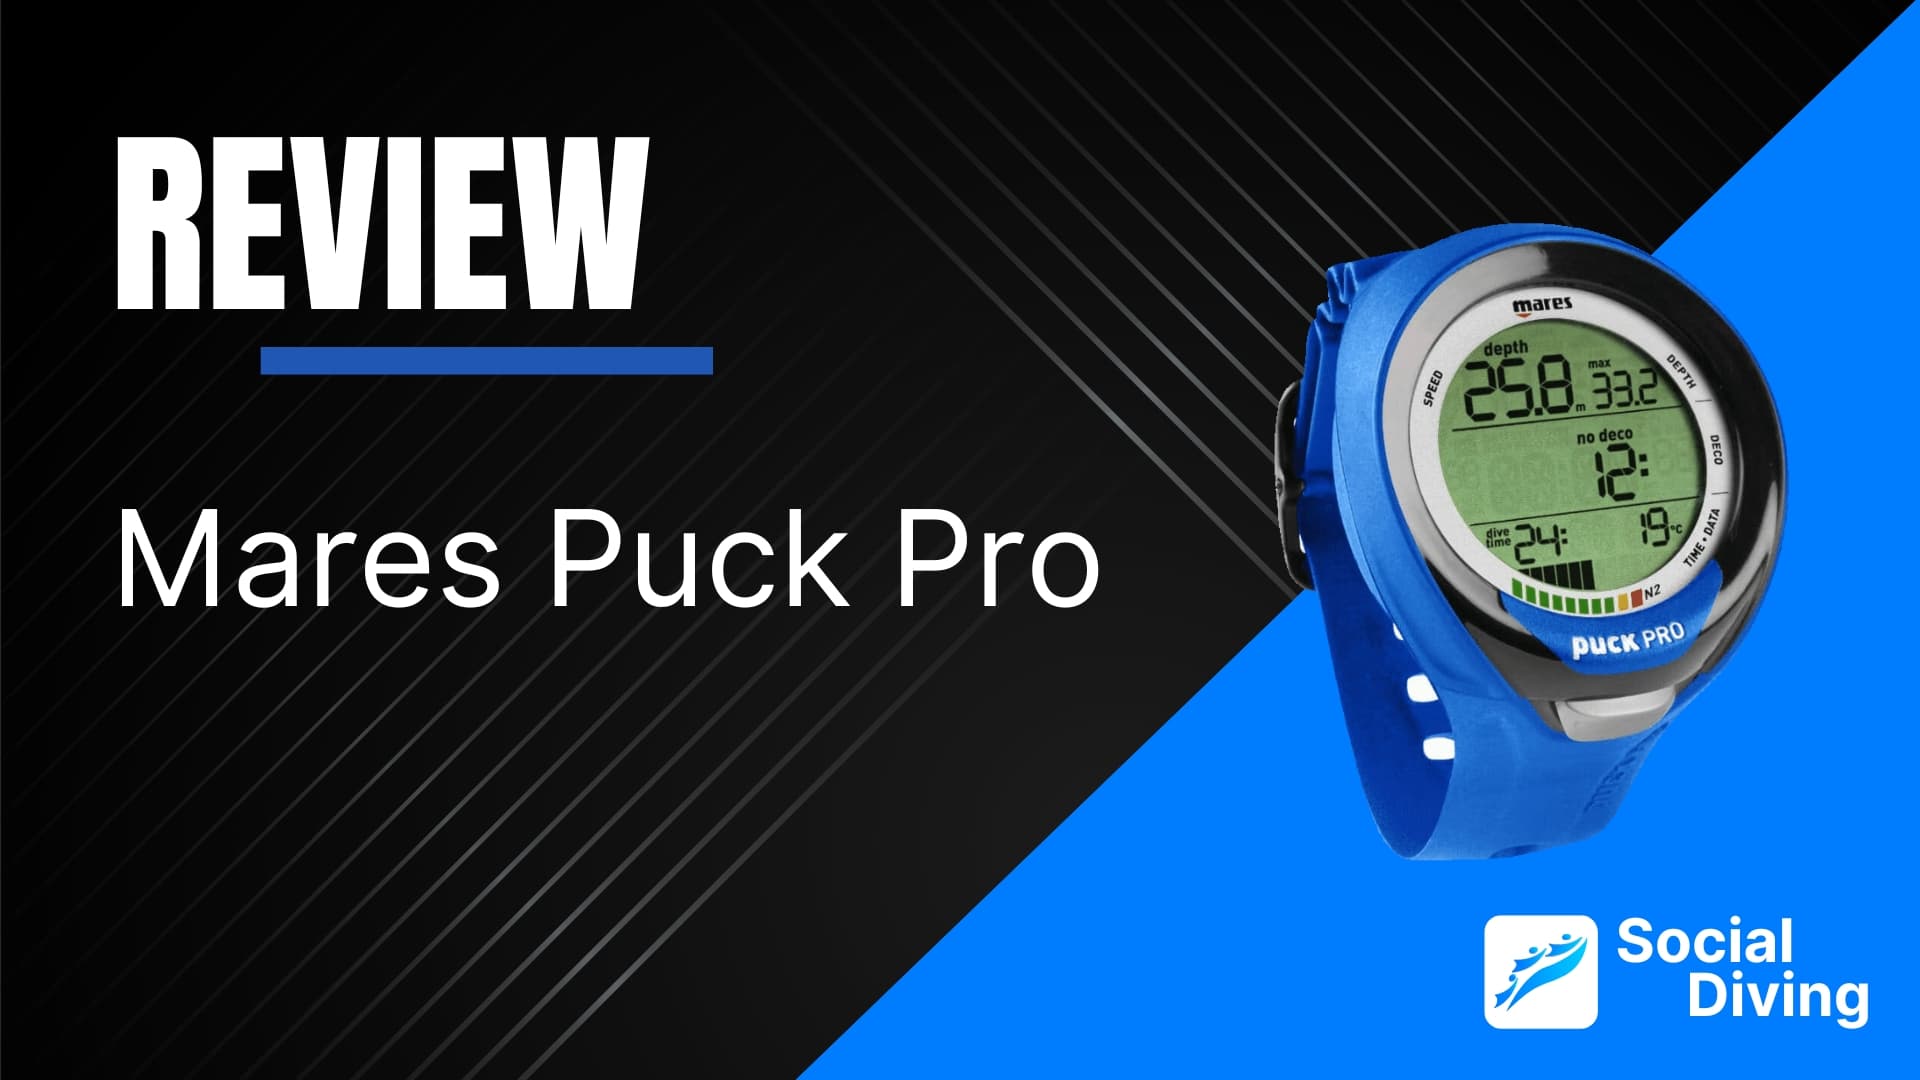 Mares Puck Pro review